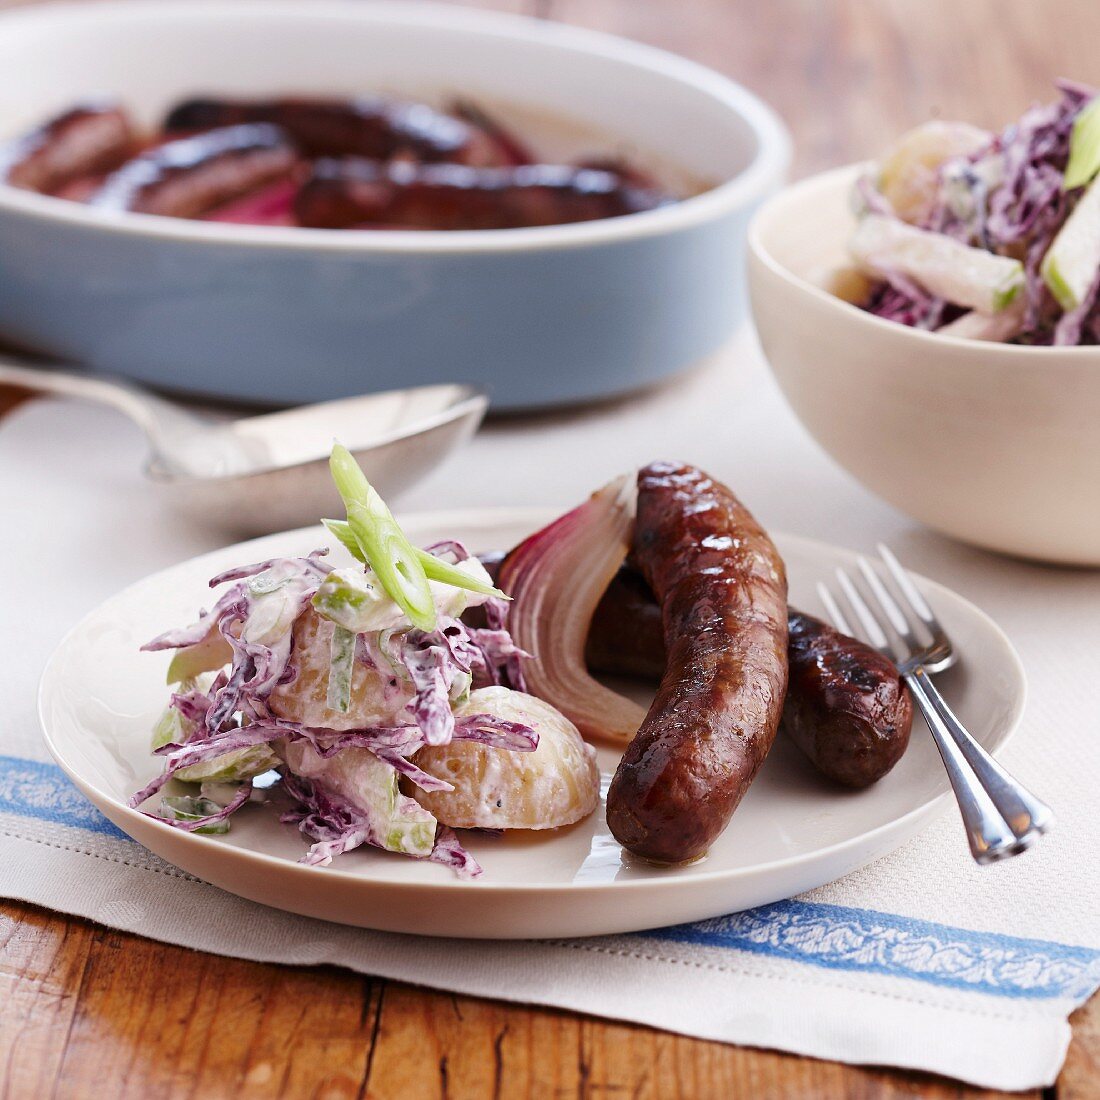 Sausages with a potato & red cabbage salad